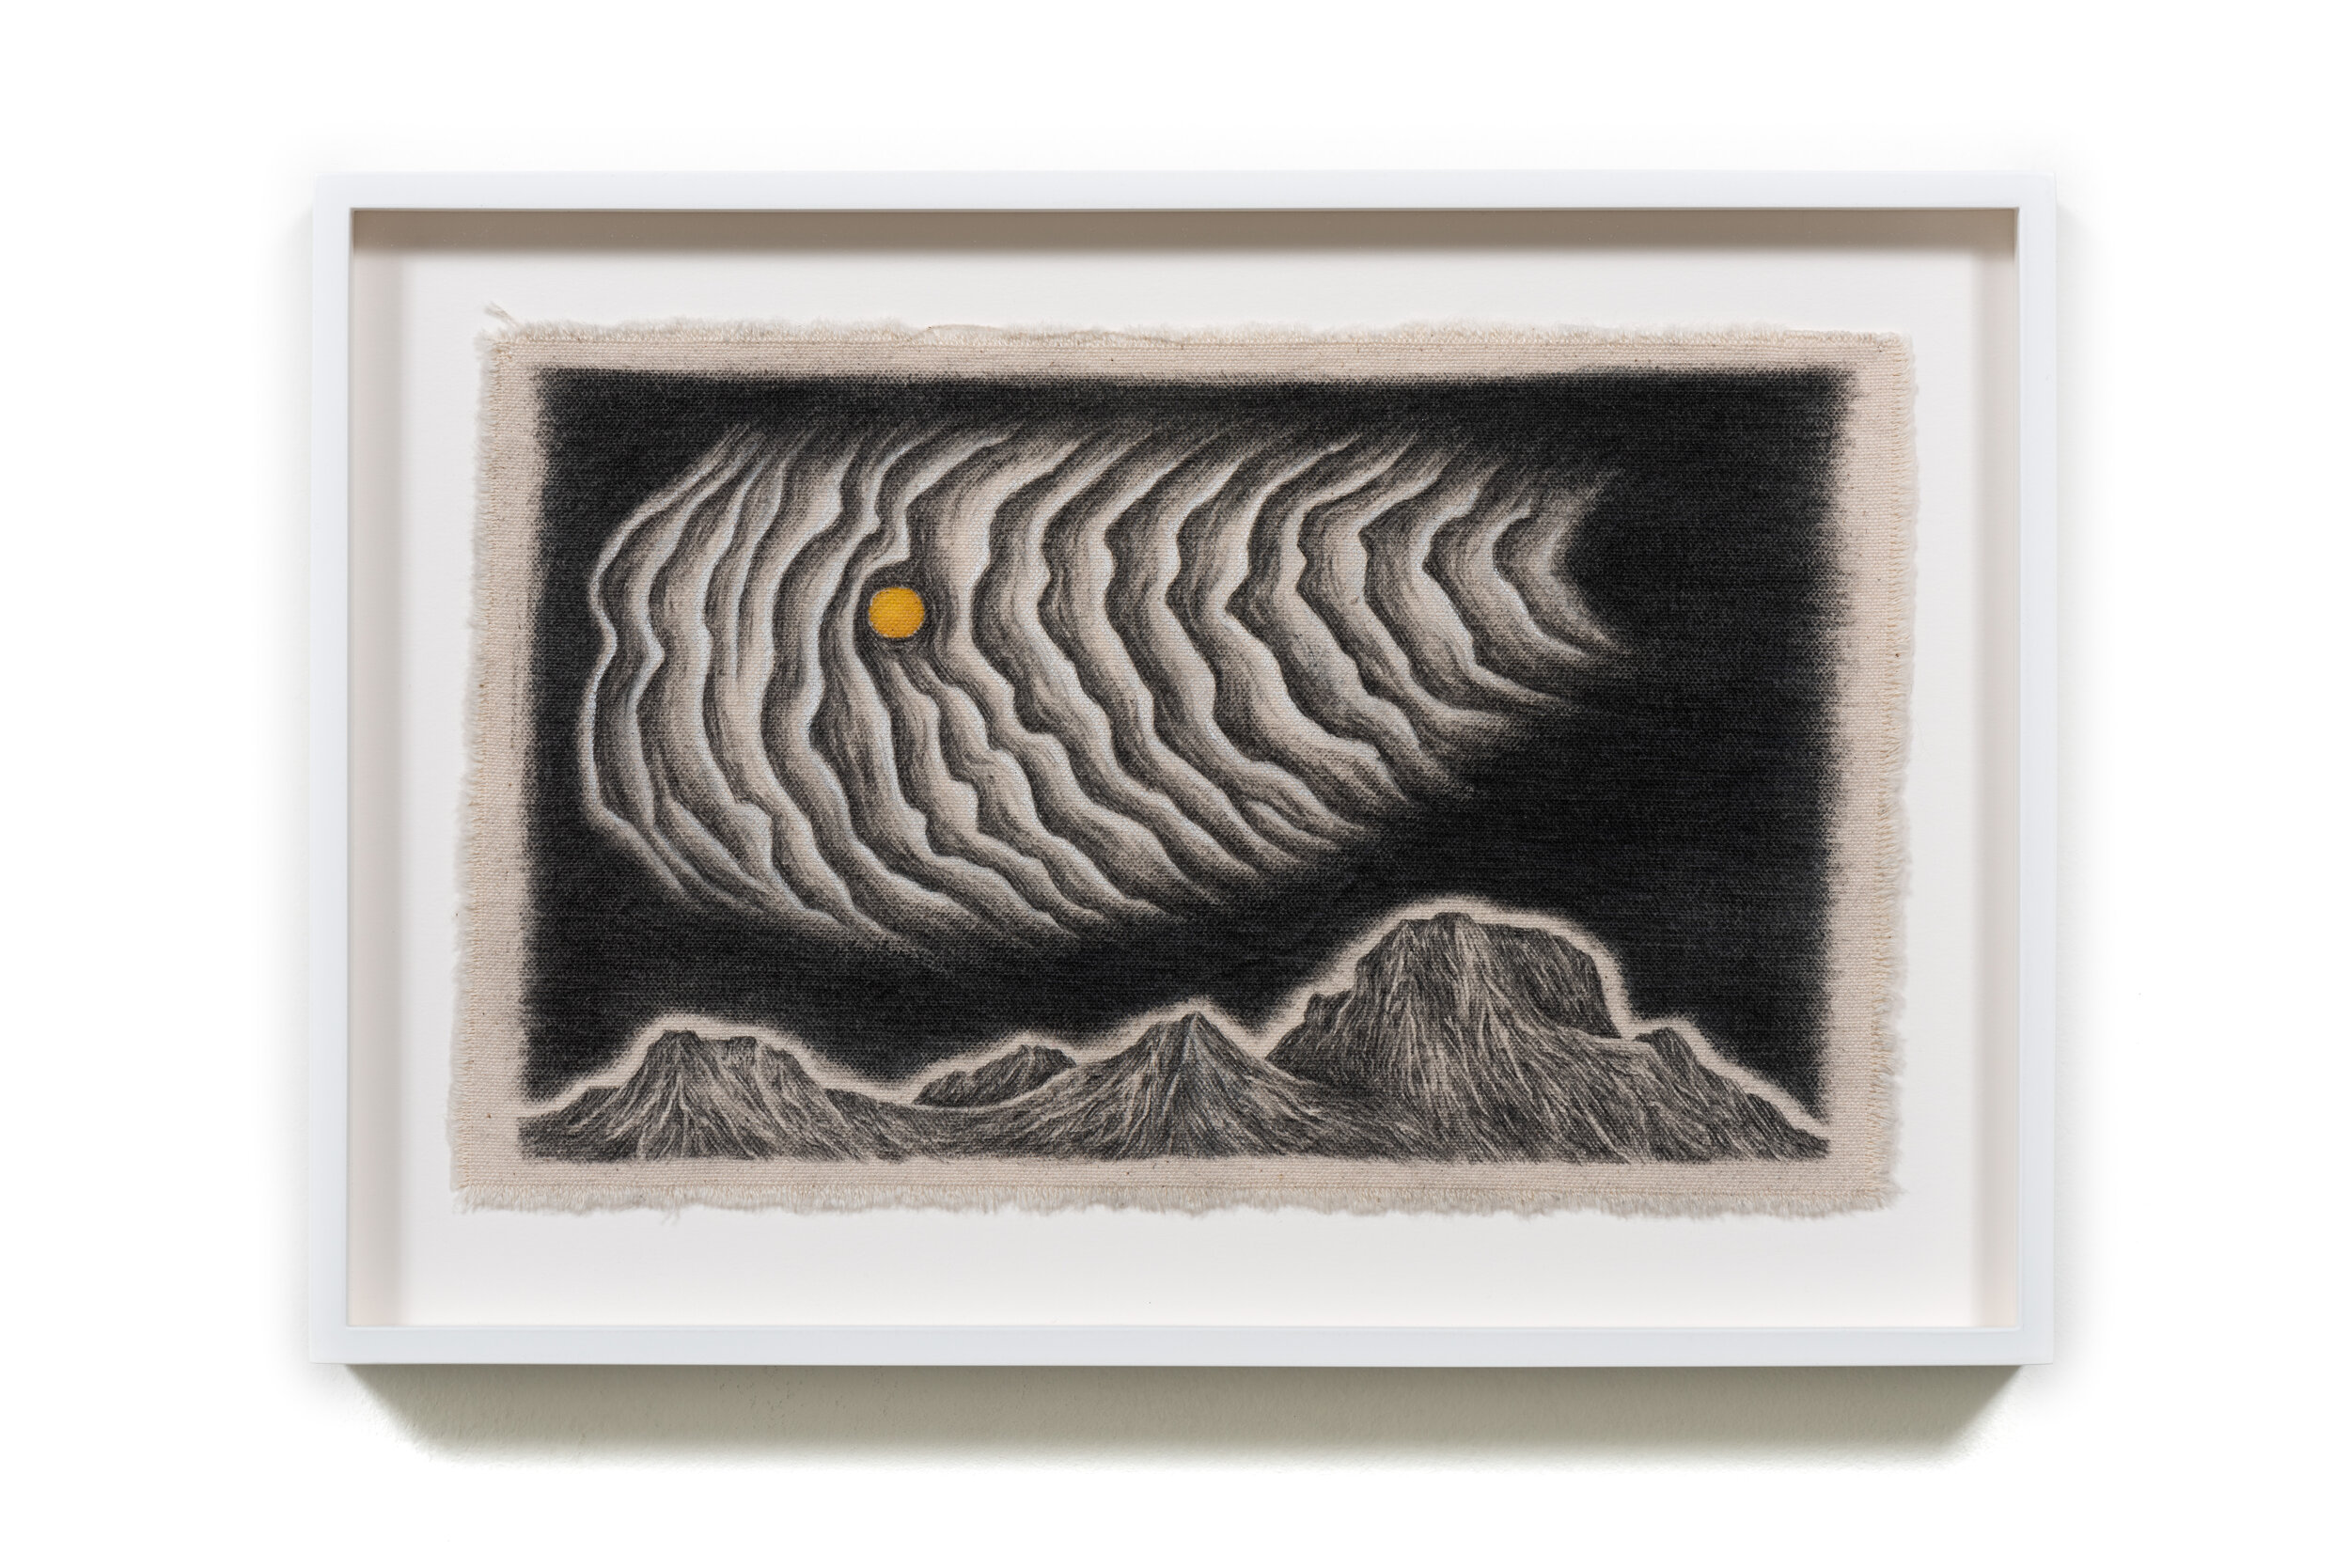   Nocturne II , 2020&nbsp; Graphite and watercolor on canvas&nbsp; 9 3/4 x 14 3/8 x 1 1/2 inches (framed)&nbsp; 